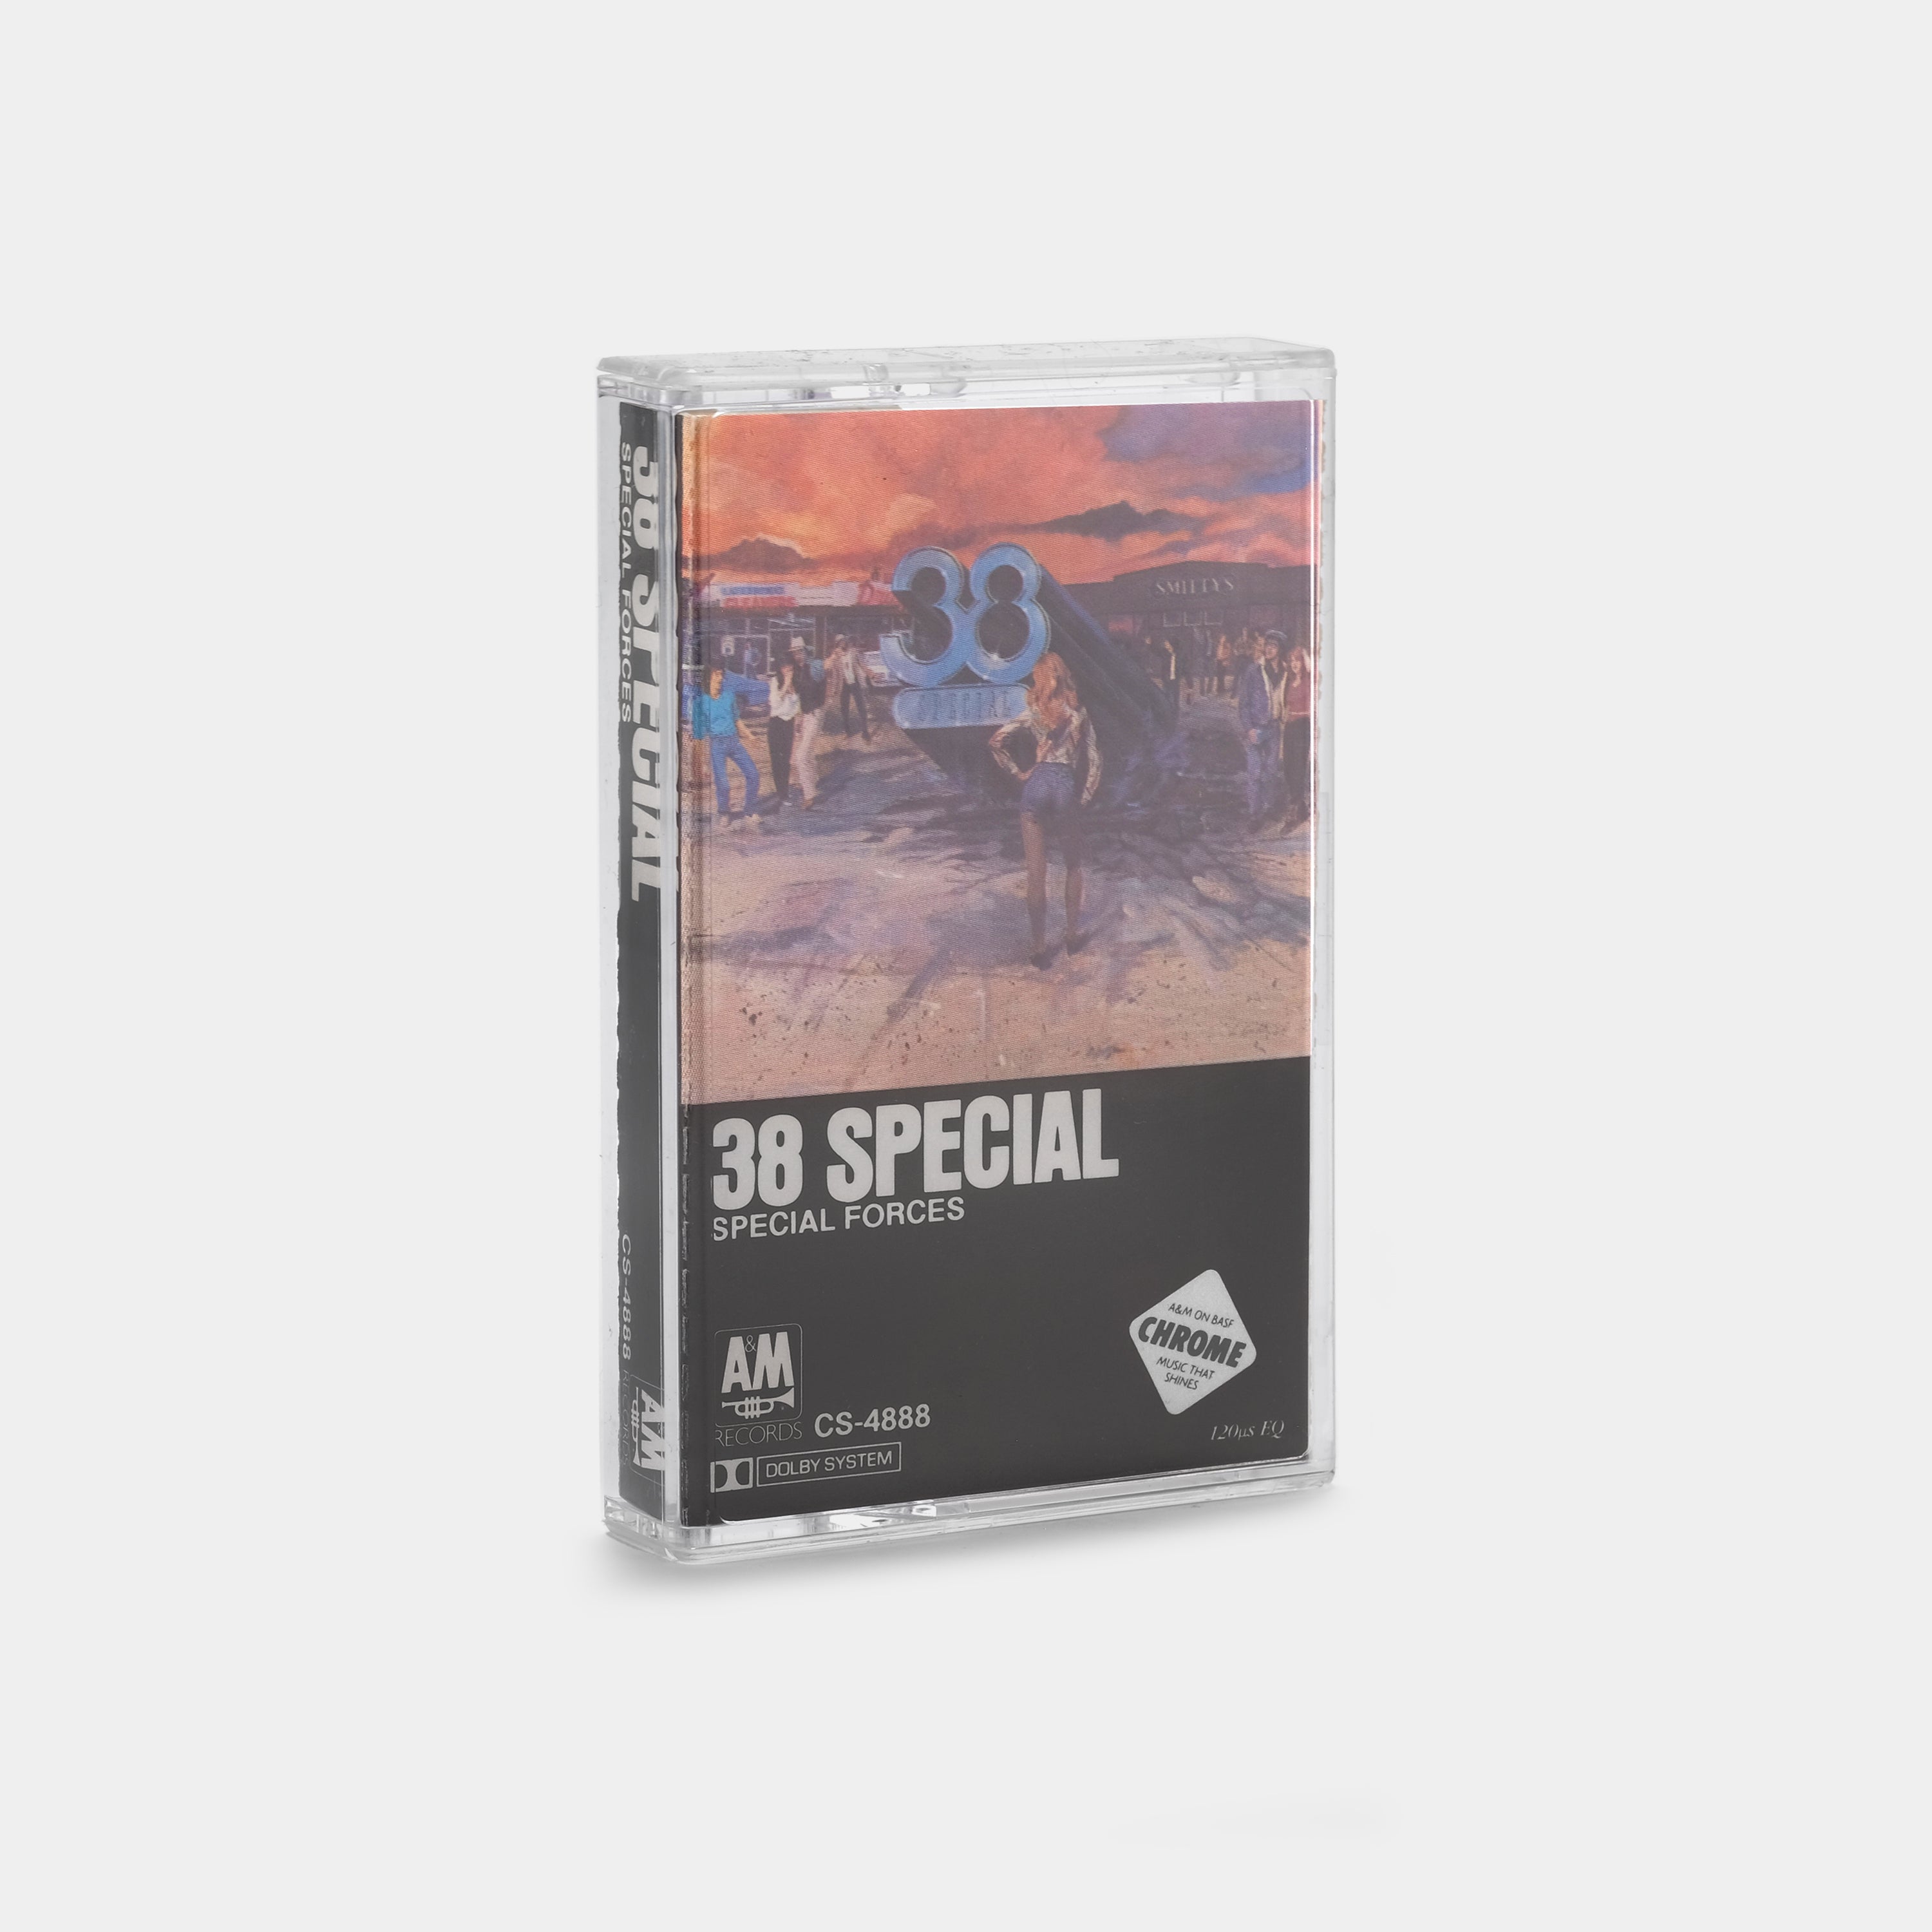 38 Special - Special Forces Cassette Tape